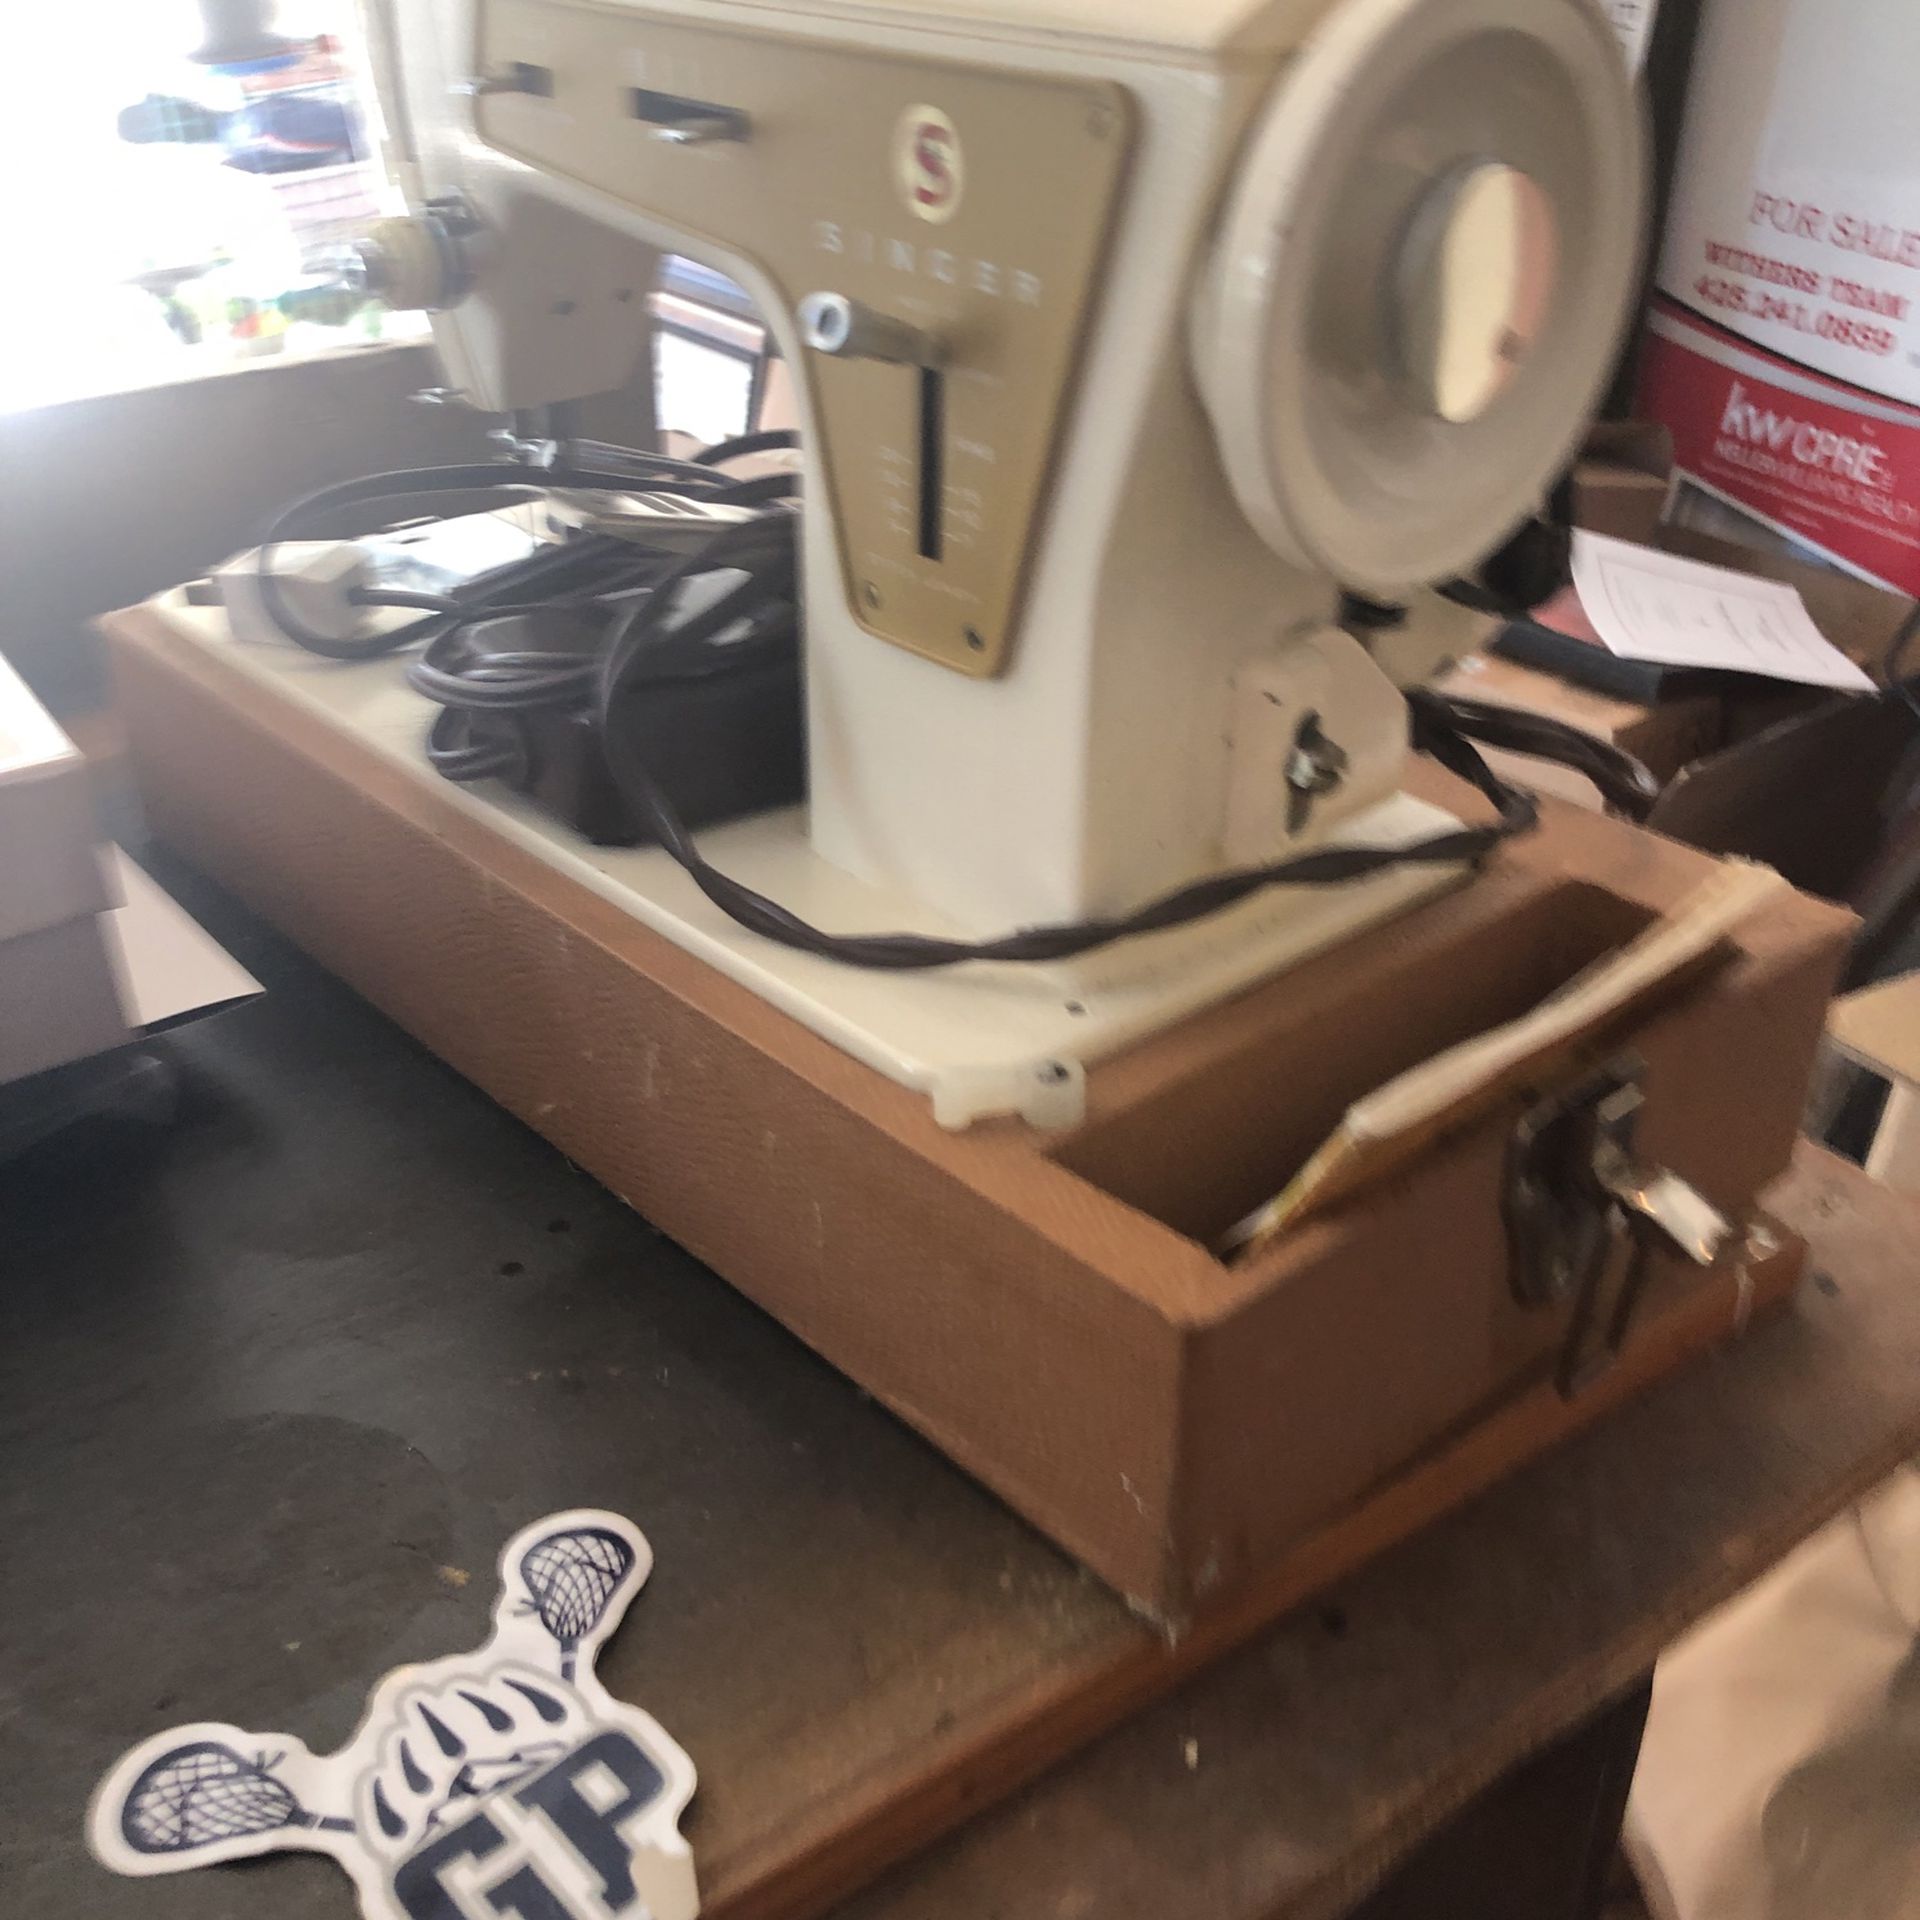 Vintage Sewing Machine. for Sale in Snohomish, WA - OfferUp